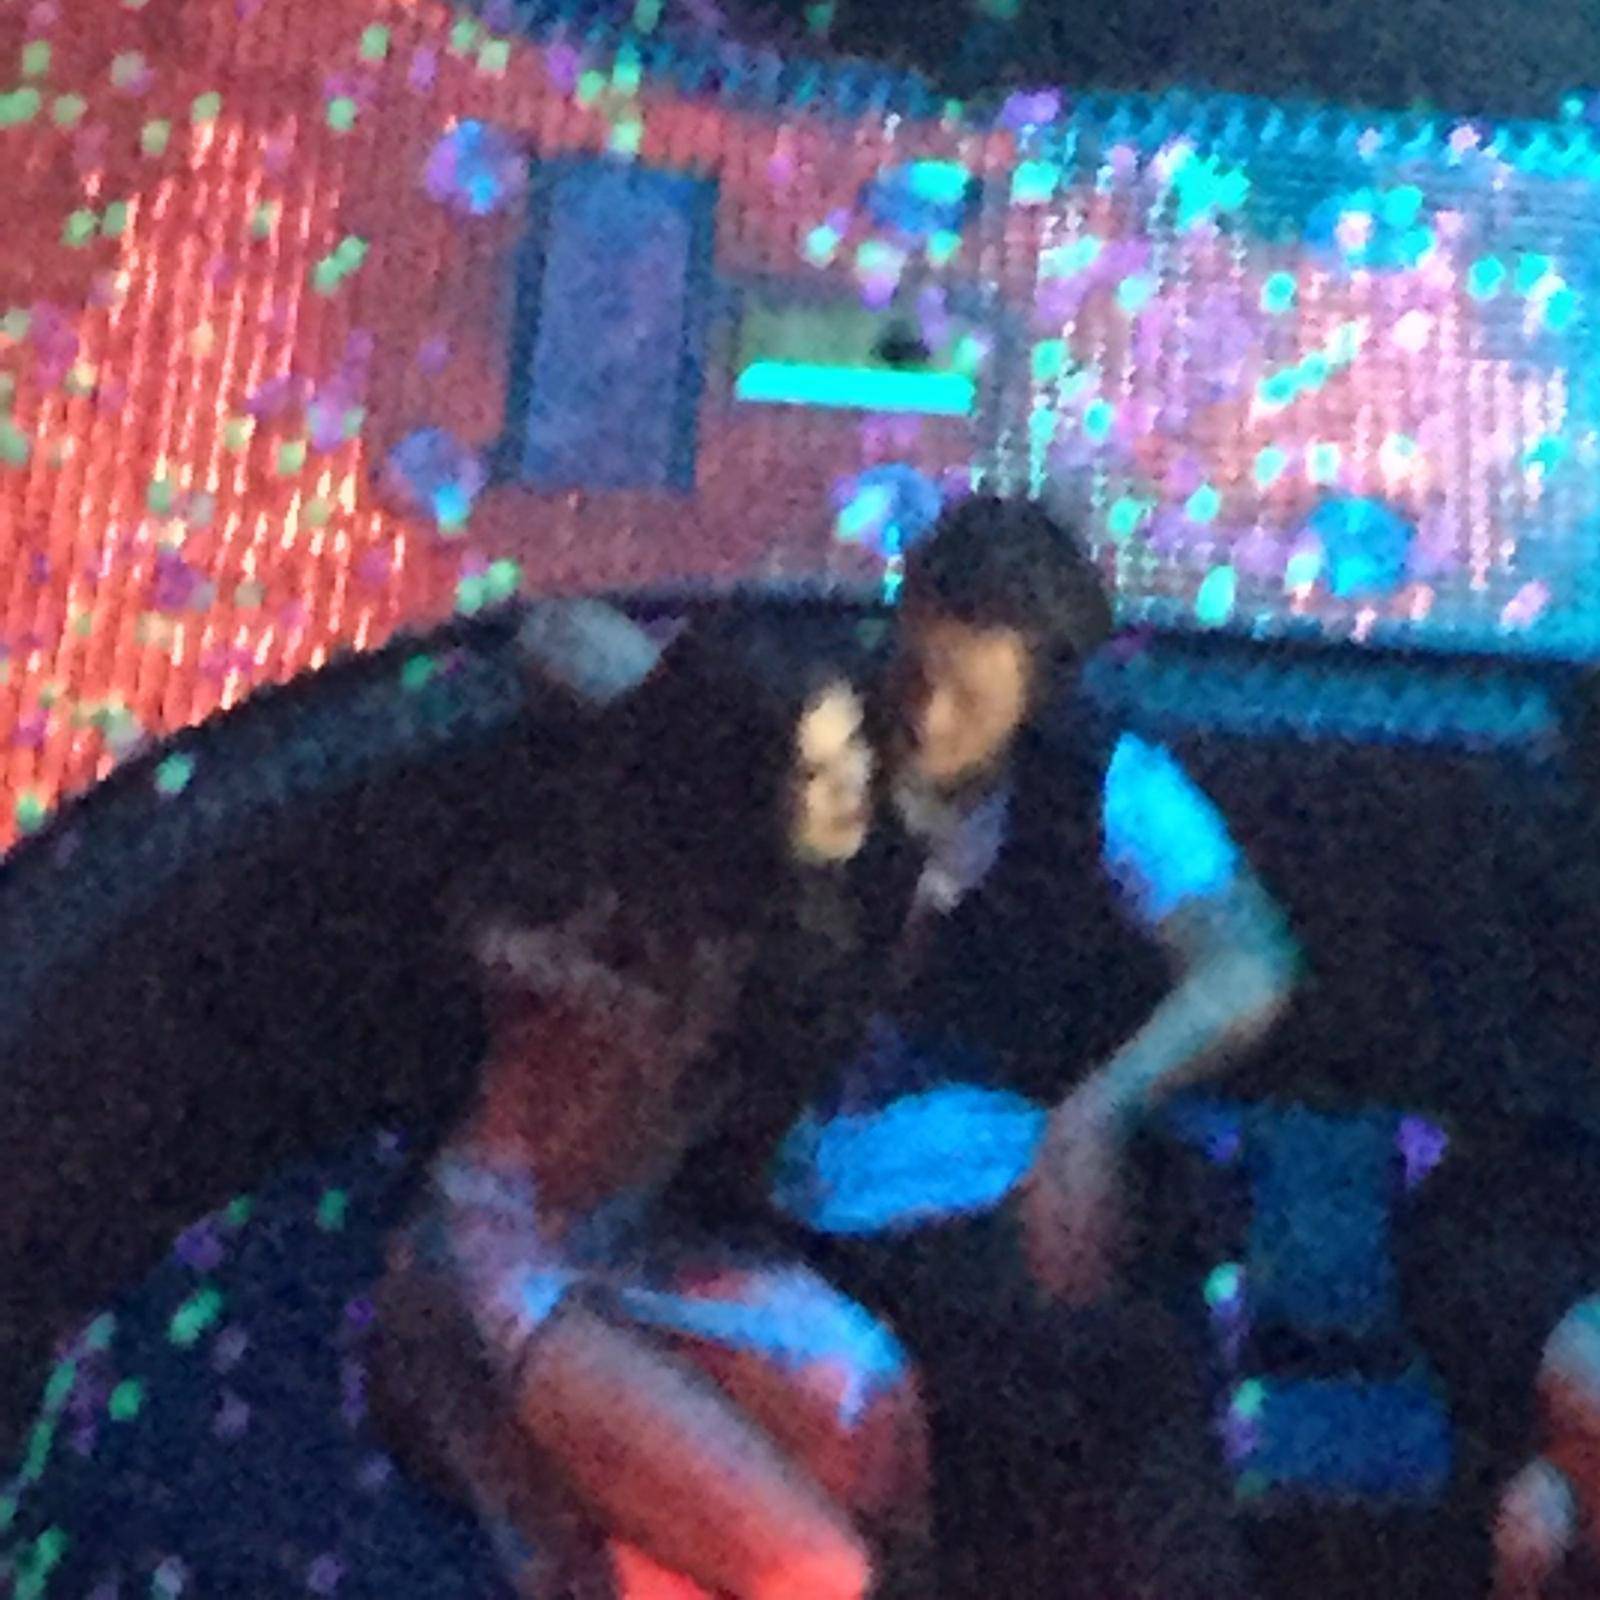 *PREMIUM EXCLUSIVE* Orlando Bloom & Selena Gomez All Over Each Other in Vegas **MUST CALL FOR PRICING**